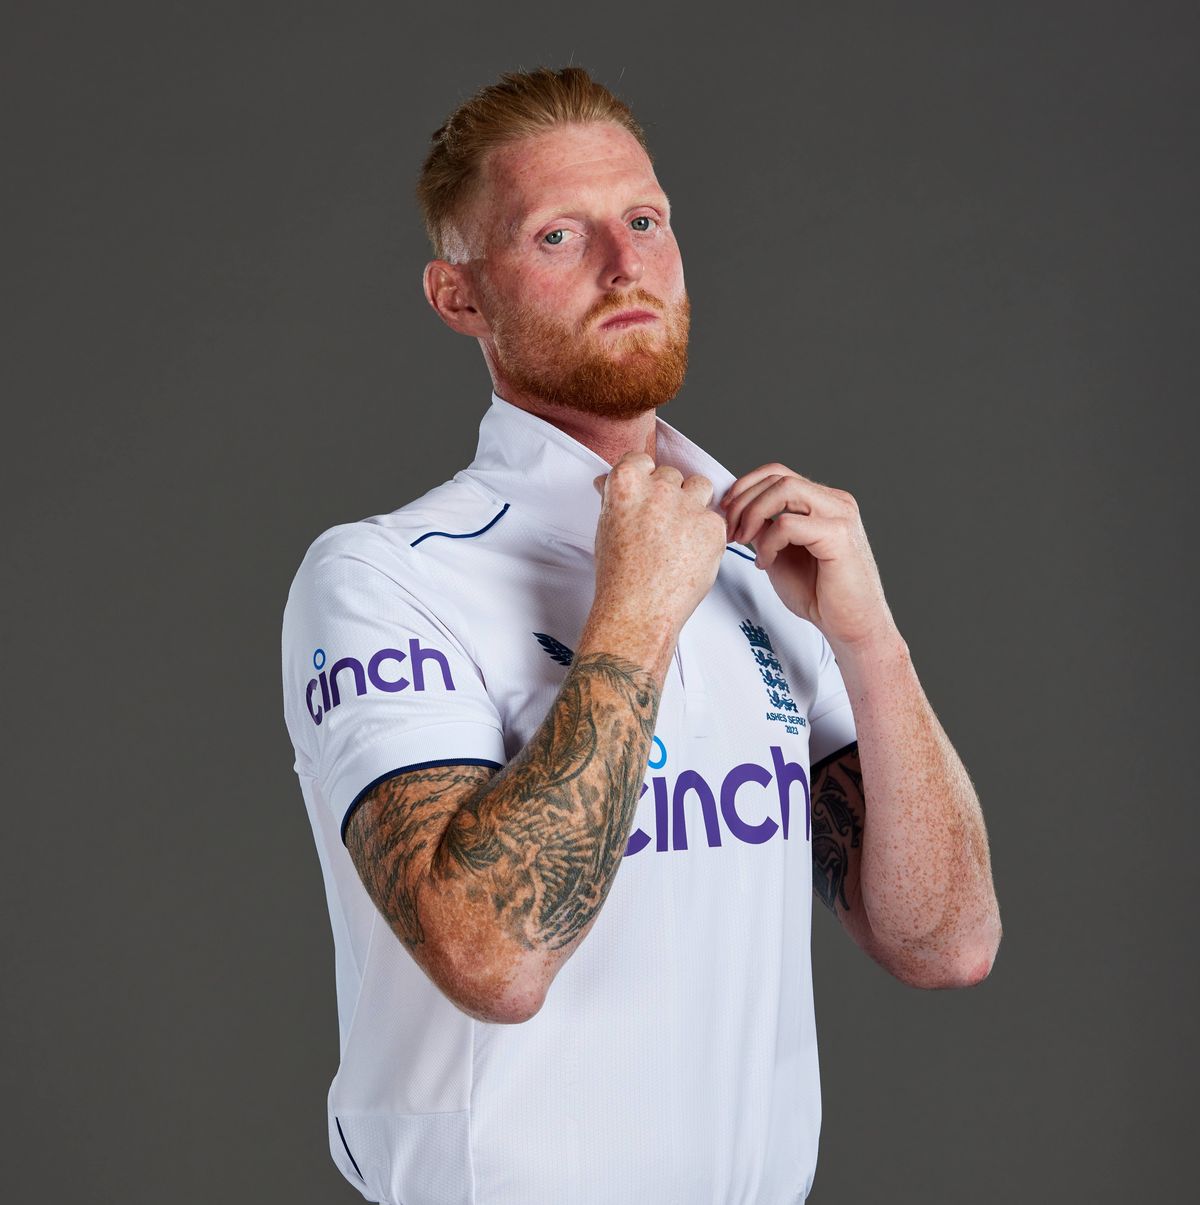 hartlepool, england may 25 ben stokes of england poses for a portrait on may 25, 2023 in hartlepool, england photo by pat elmont ecbecb via getty images